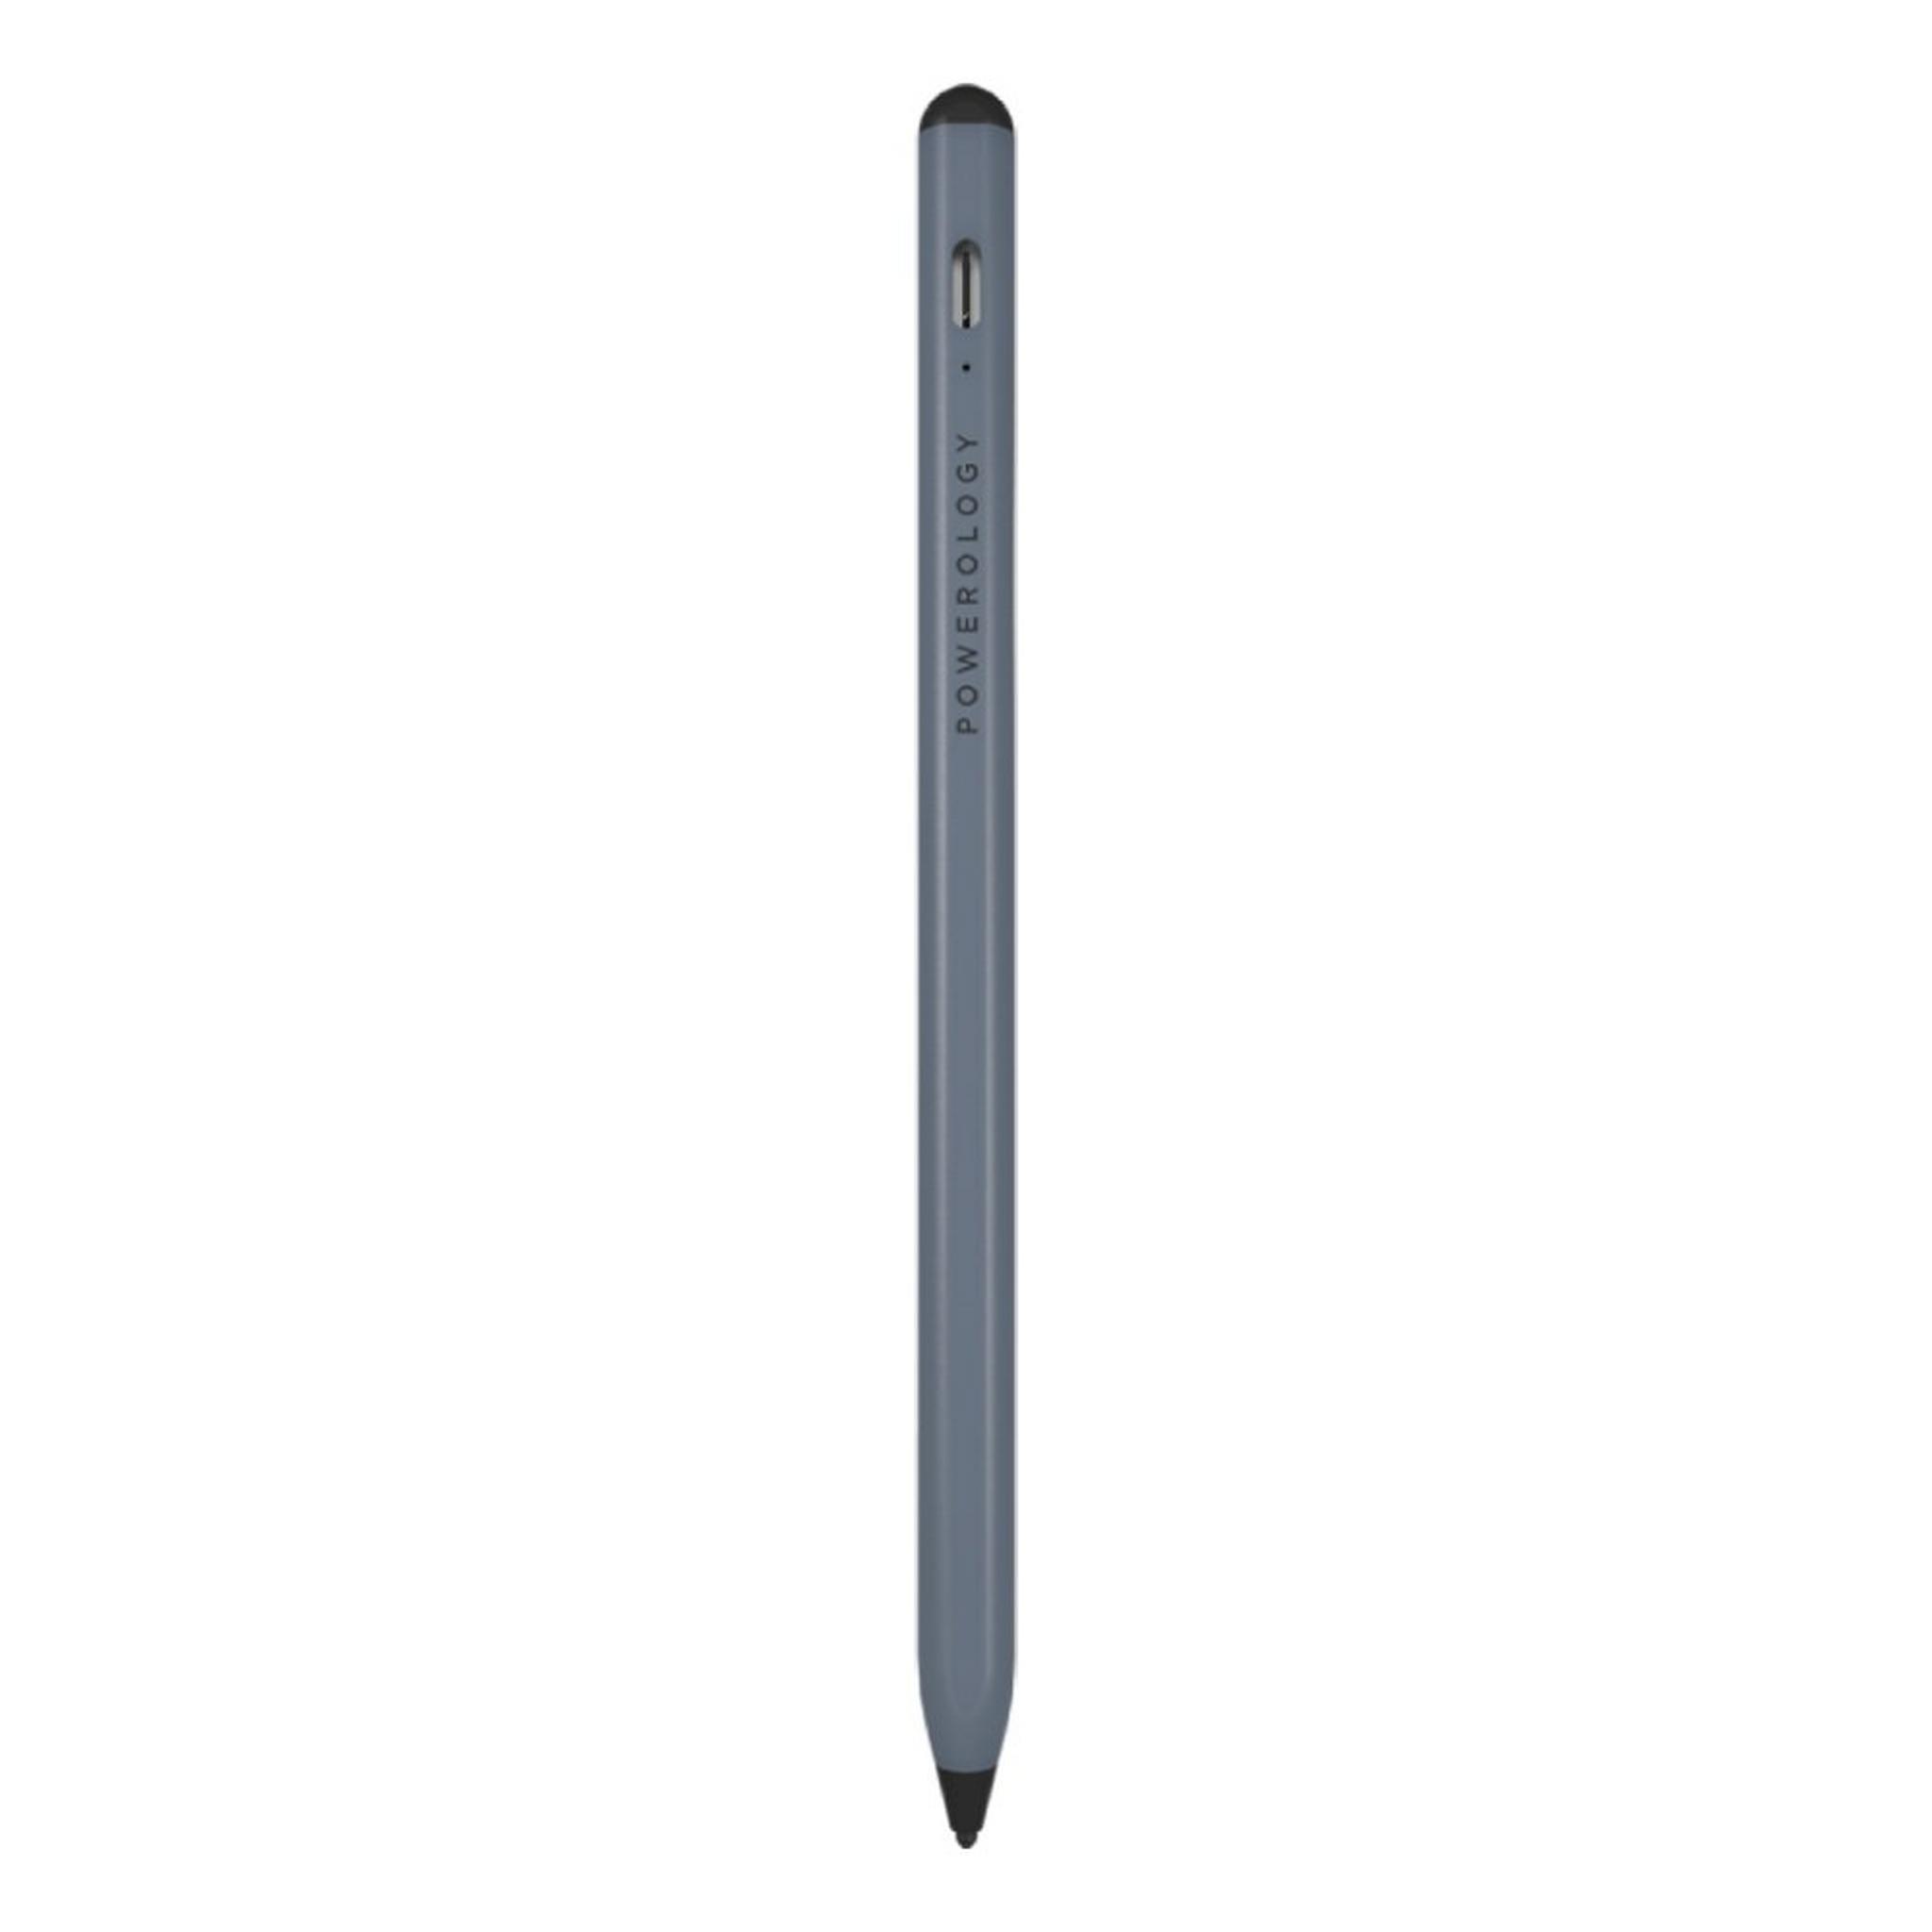 Powerology Universal 2 in 1 Smart Pencil, P21STYPGY - Grey